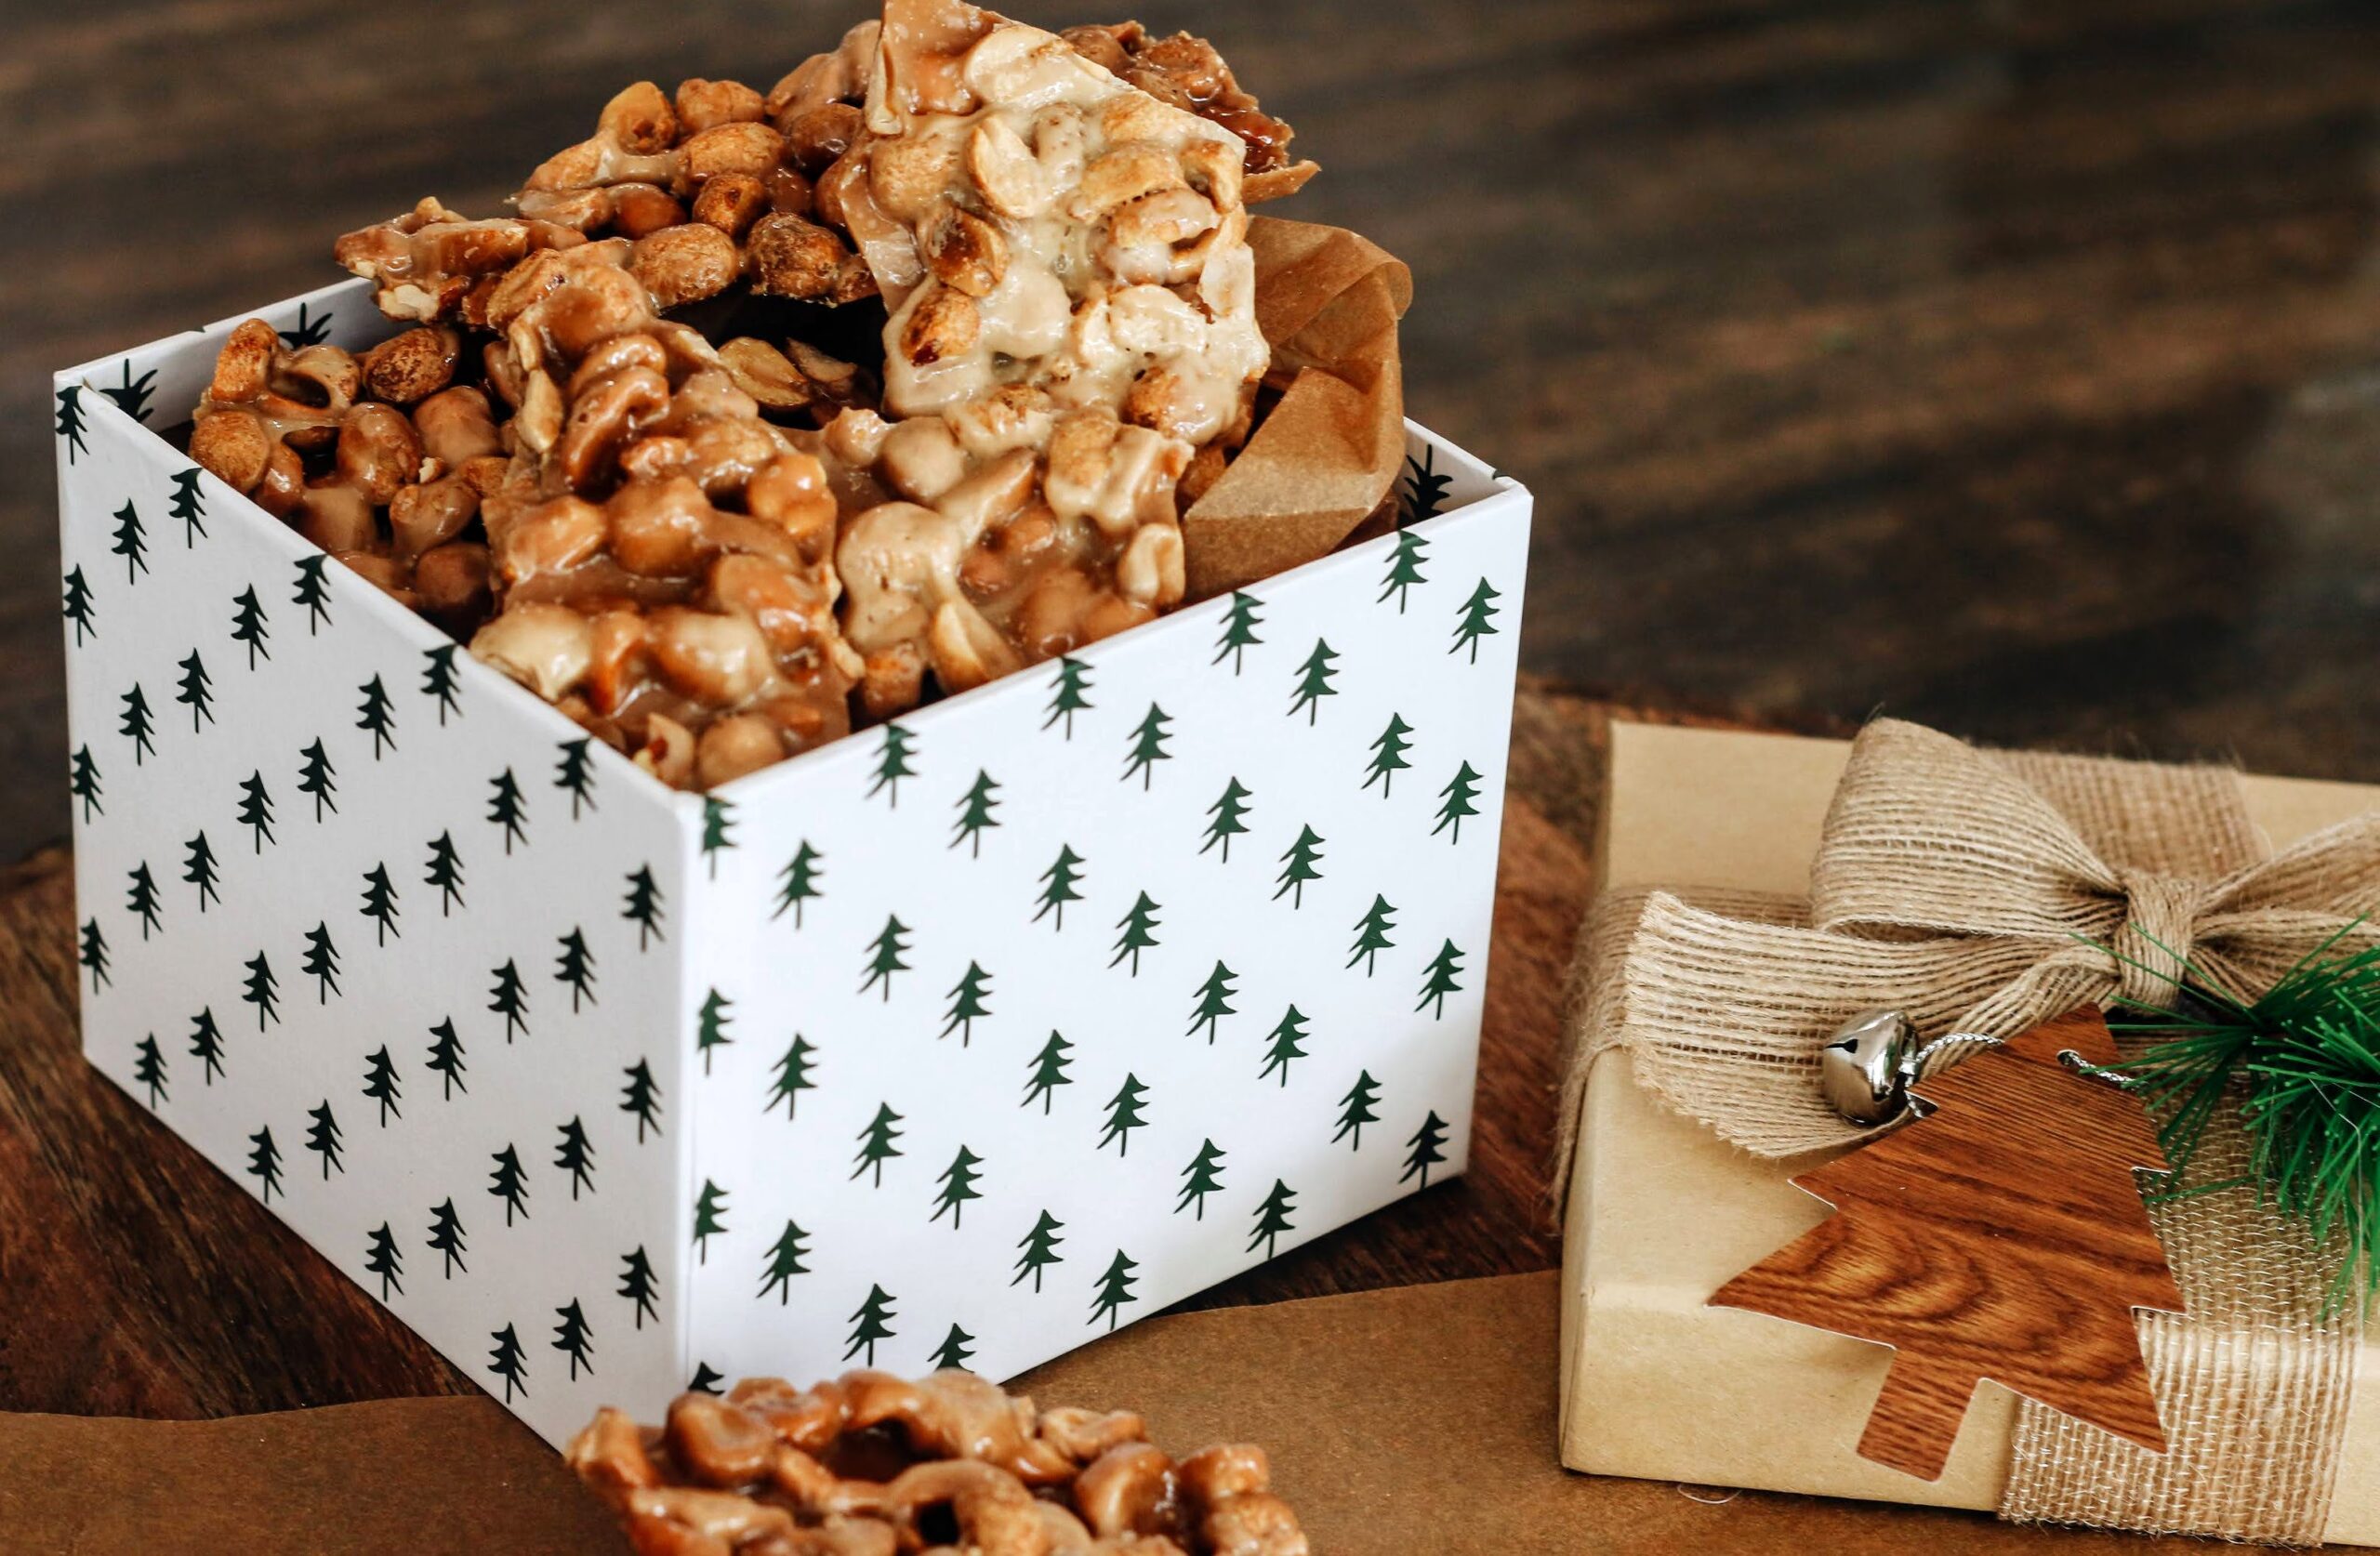 A box of nuts and a gift on the table